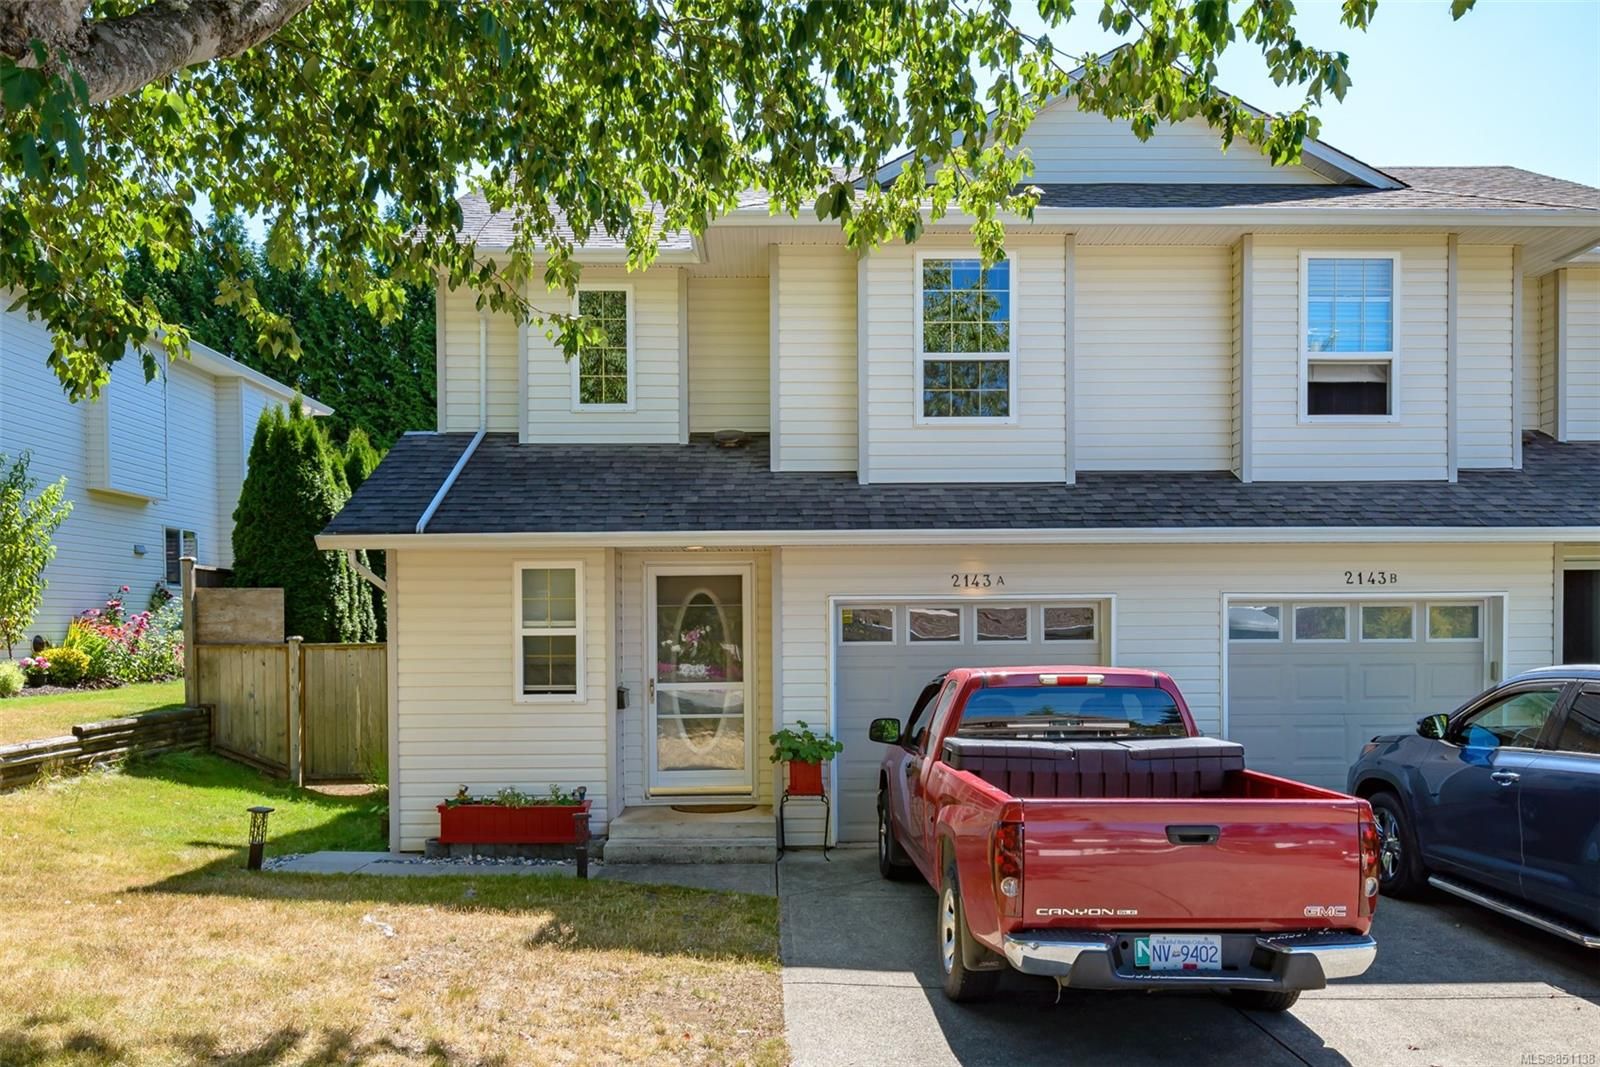 Main Photo: A 2143 Mission Rd in Courtenay: CV Courtenay East Half Duplex for sale (Comox Valley)  : MLS®# 851138